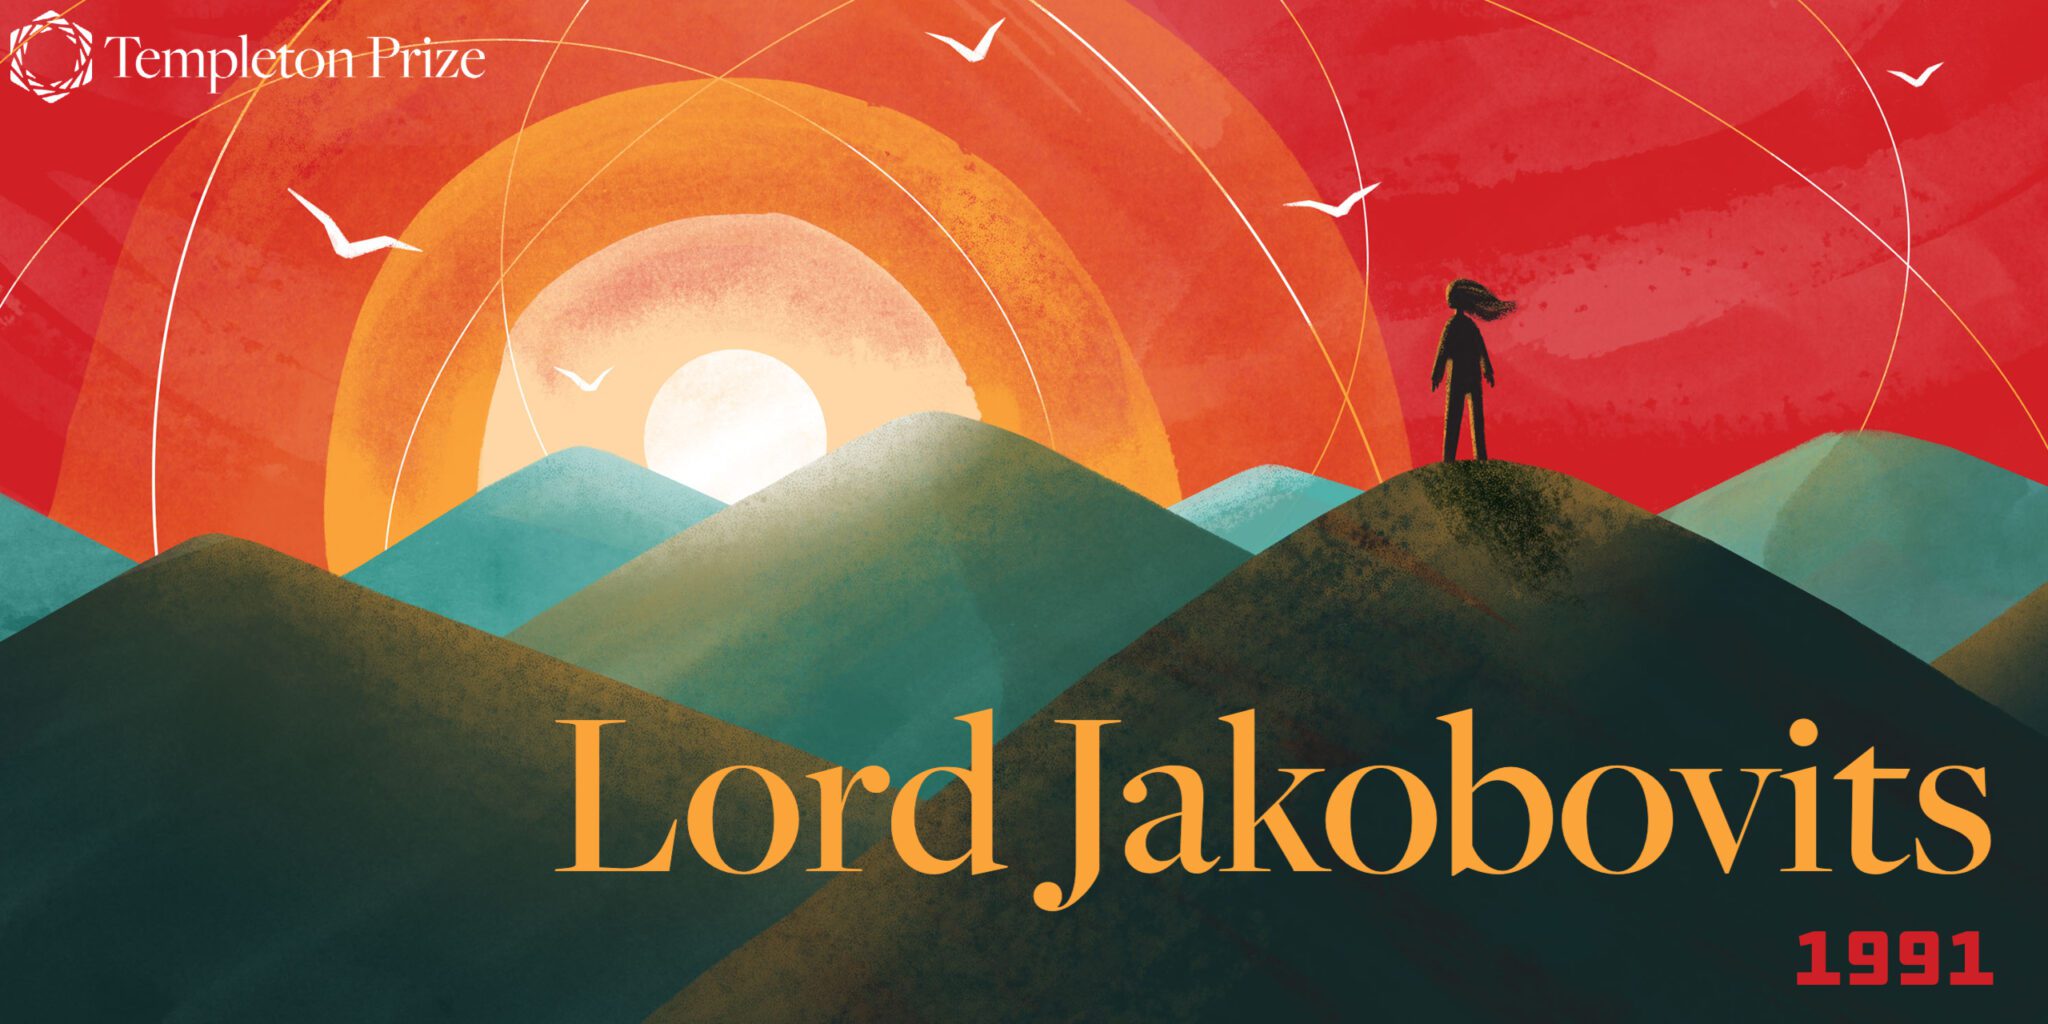 Lord Jakobovits: A Champion of Moral Ethics and Interfaith Dialogue